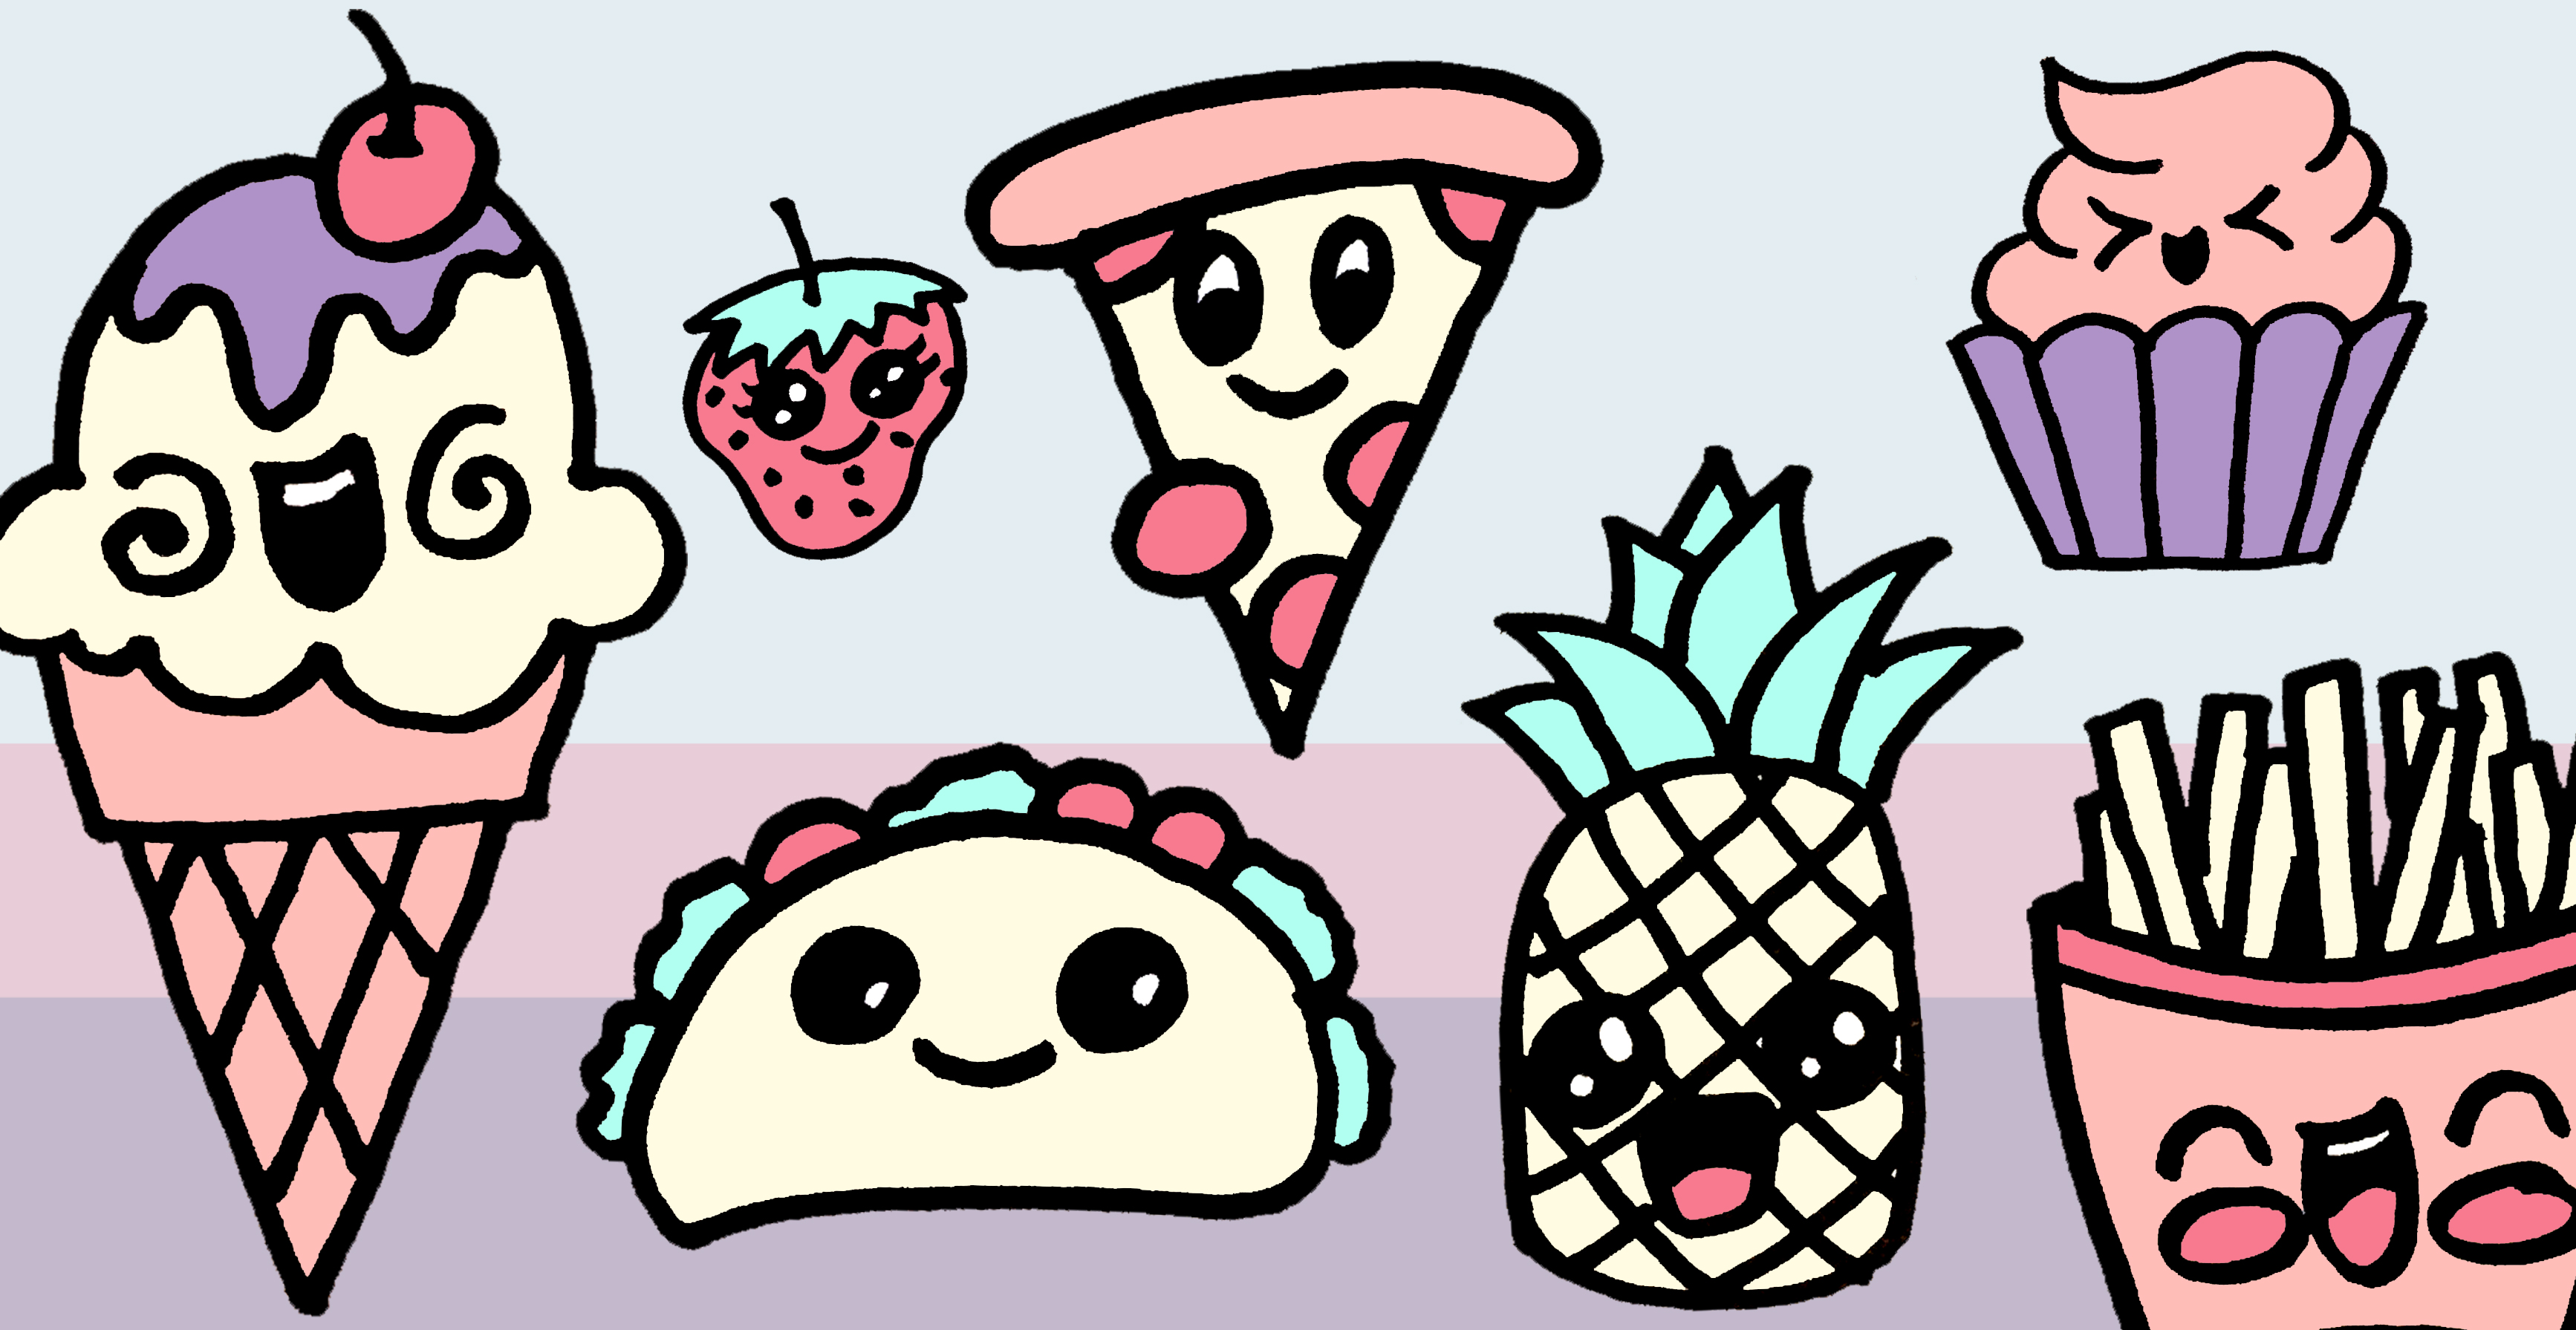 Draw & Color Cute Kawaii Food Characters Small Online Class for Ages